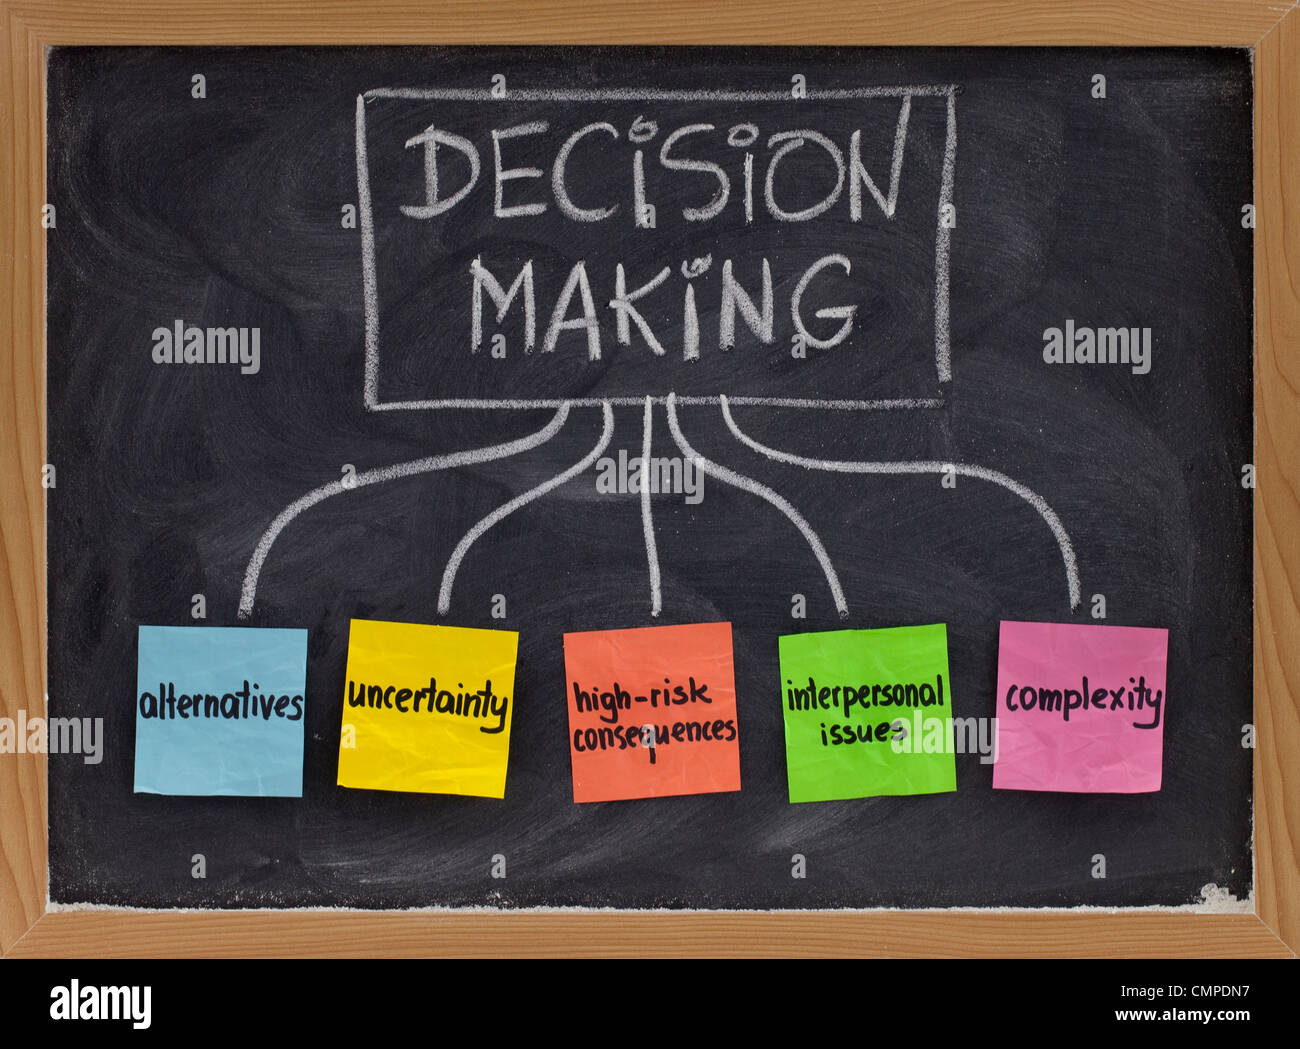 topics related to decision making process - uncertainty, alternatives, risk consequences, complexity, personal issues Stock Photo